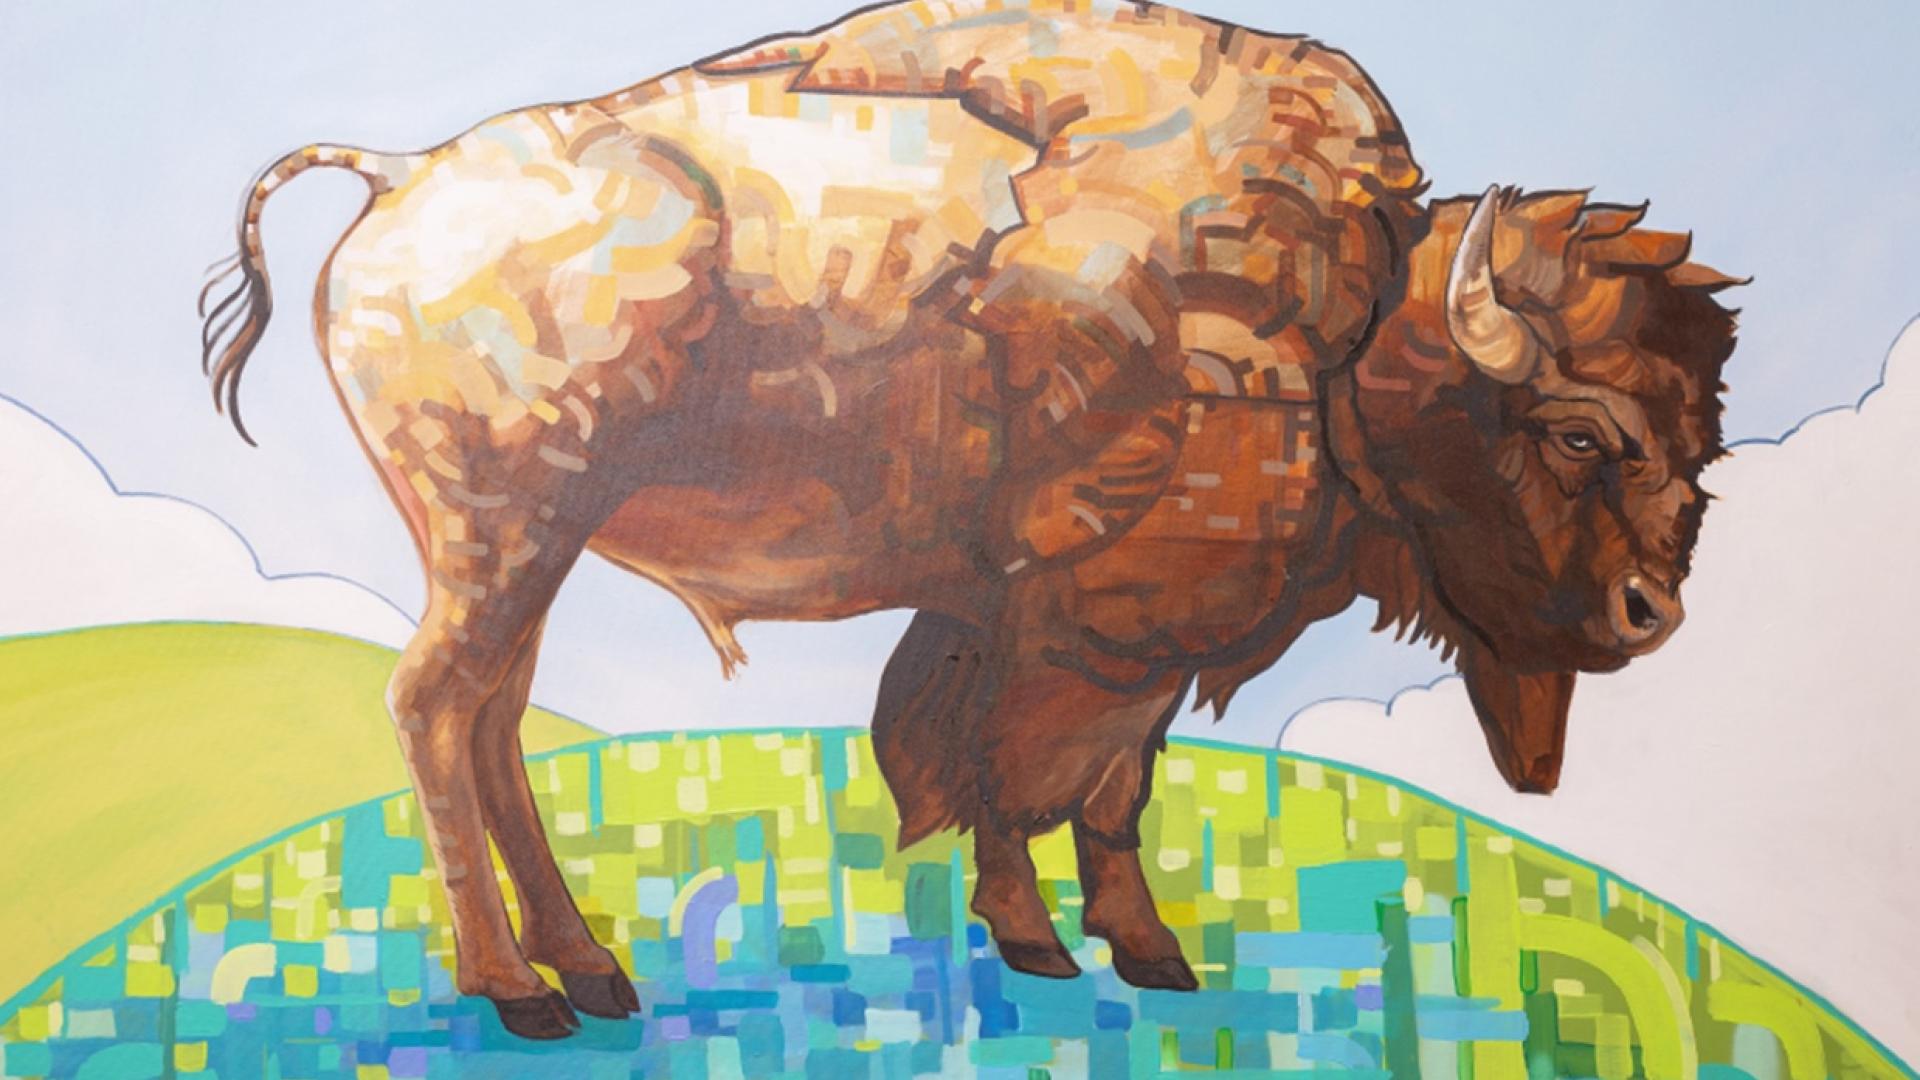 Painting of a bison standing against a landscape background of a field.